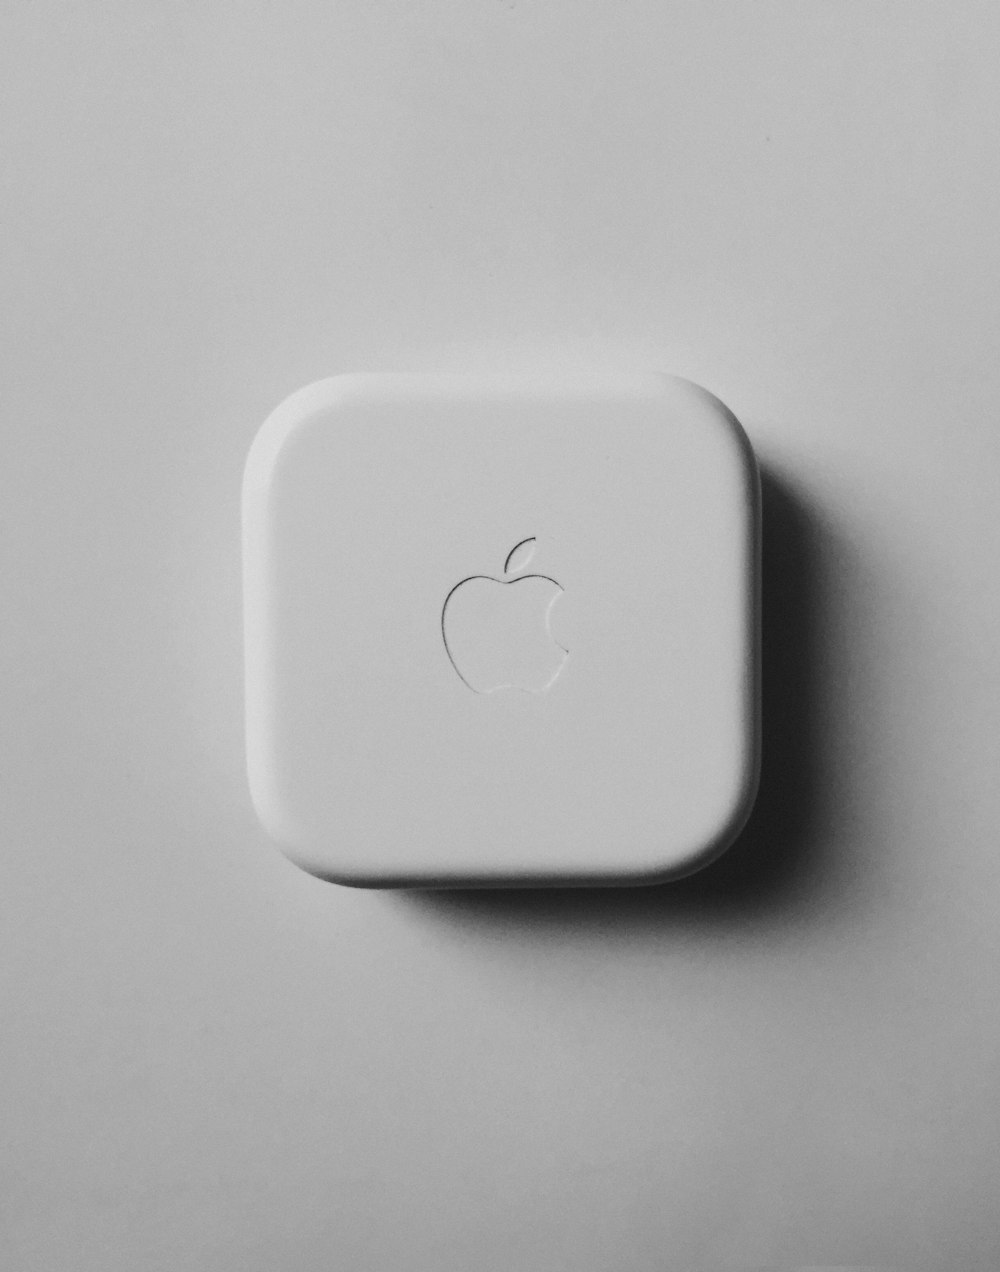 an apple logo is shown on a white surface